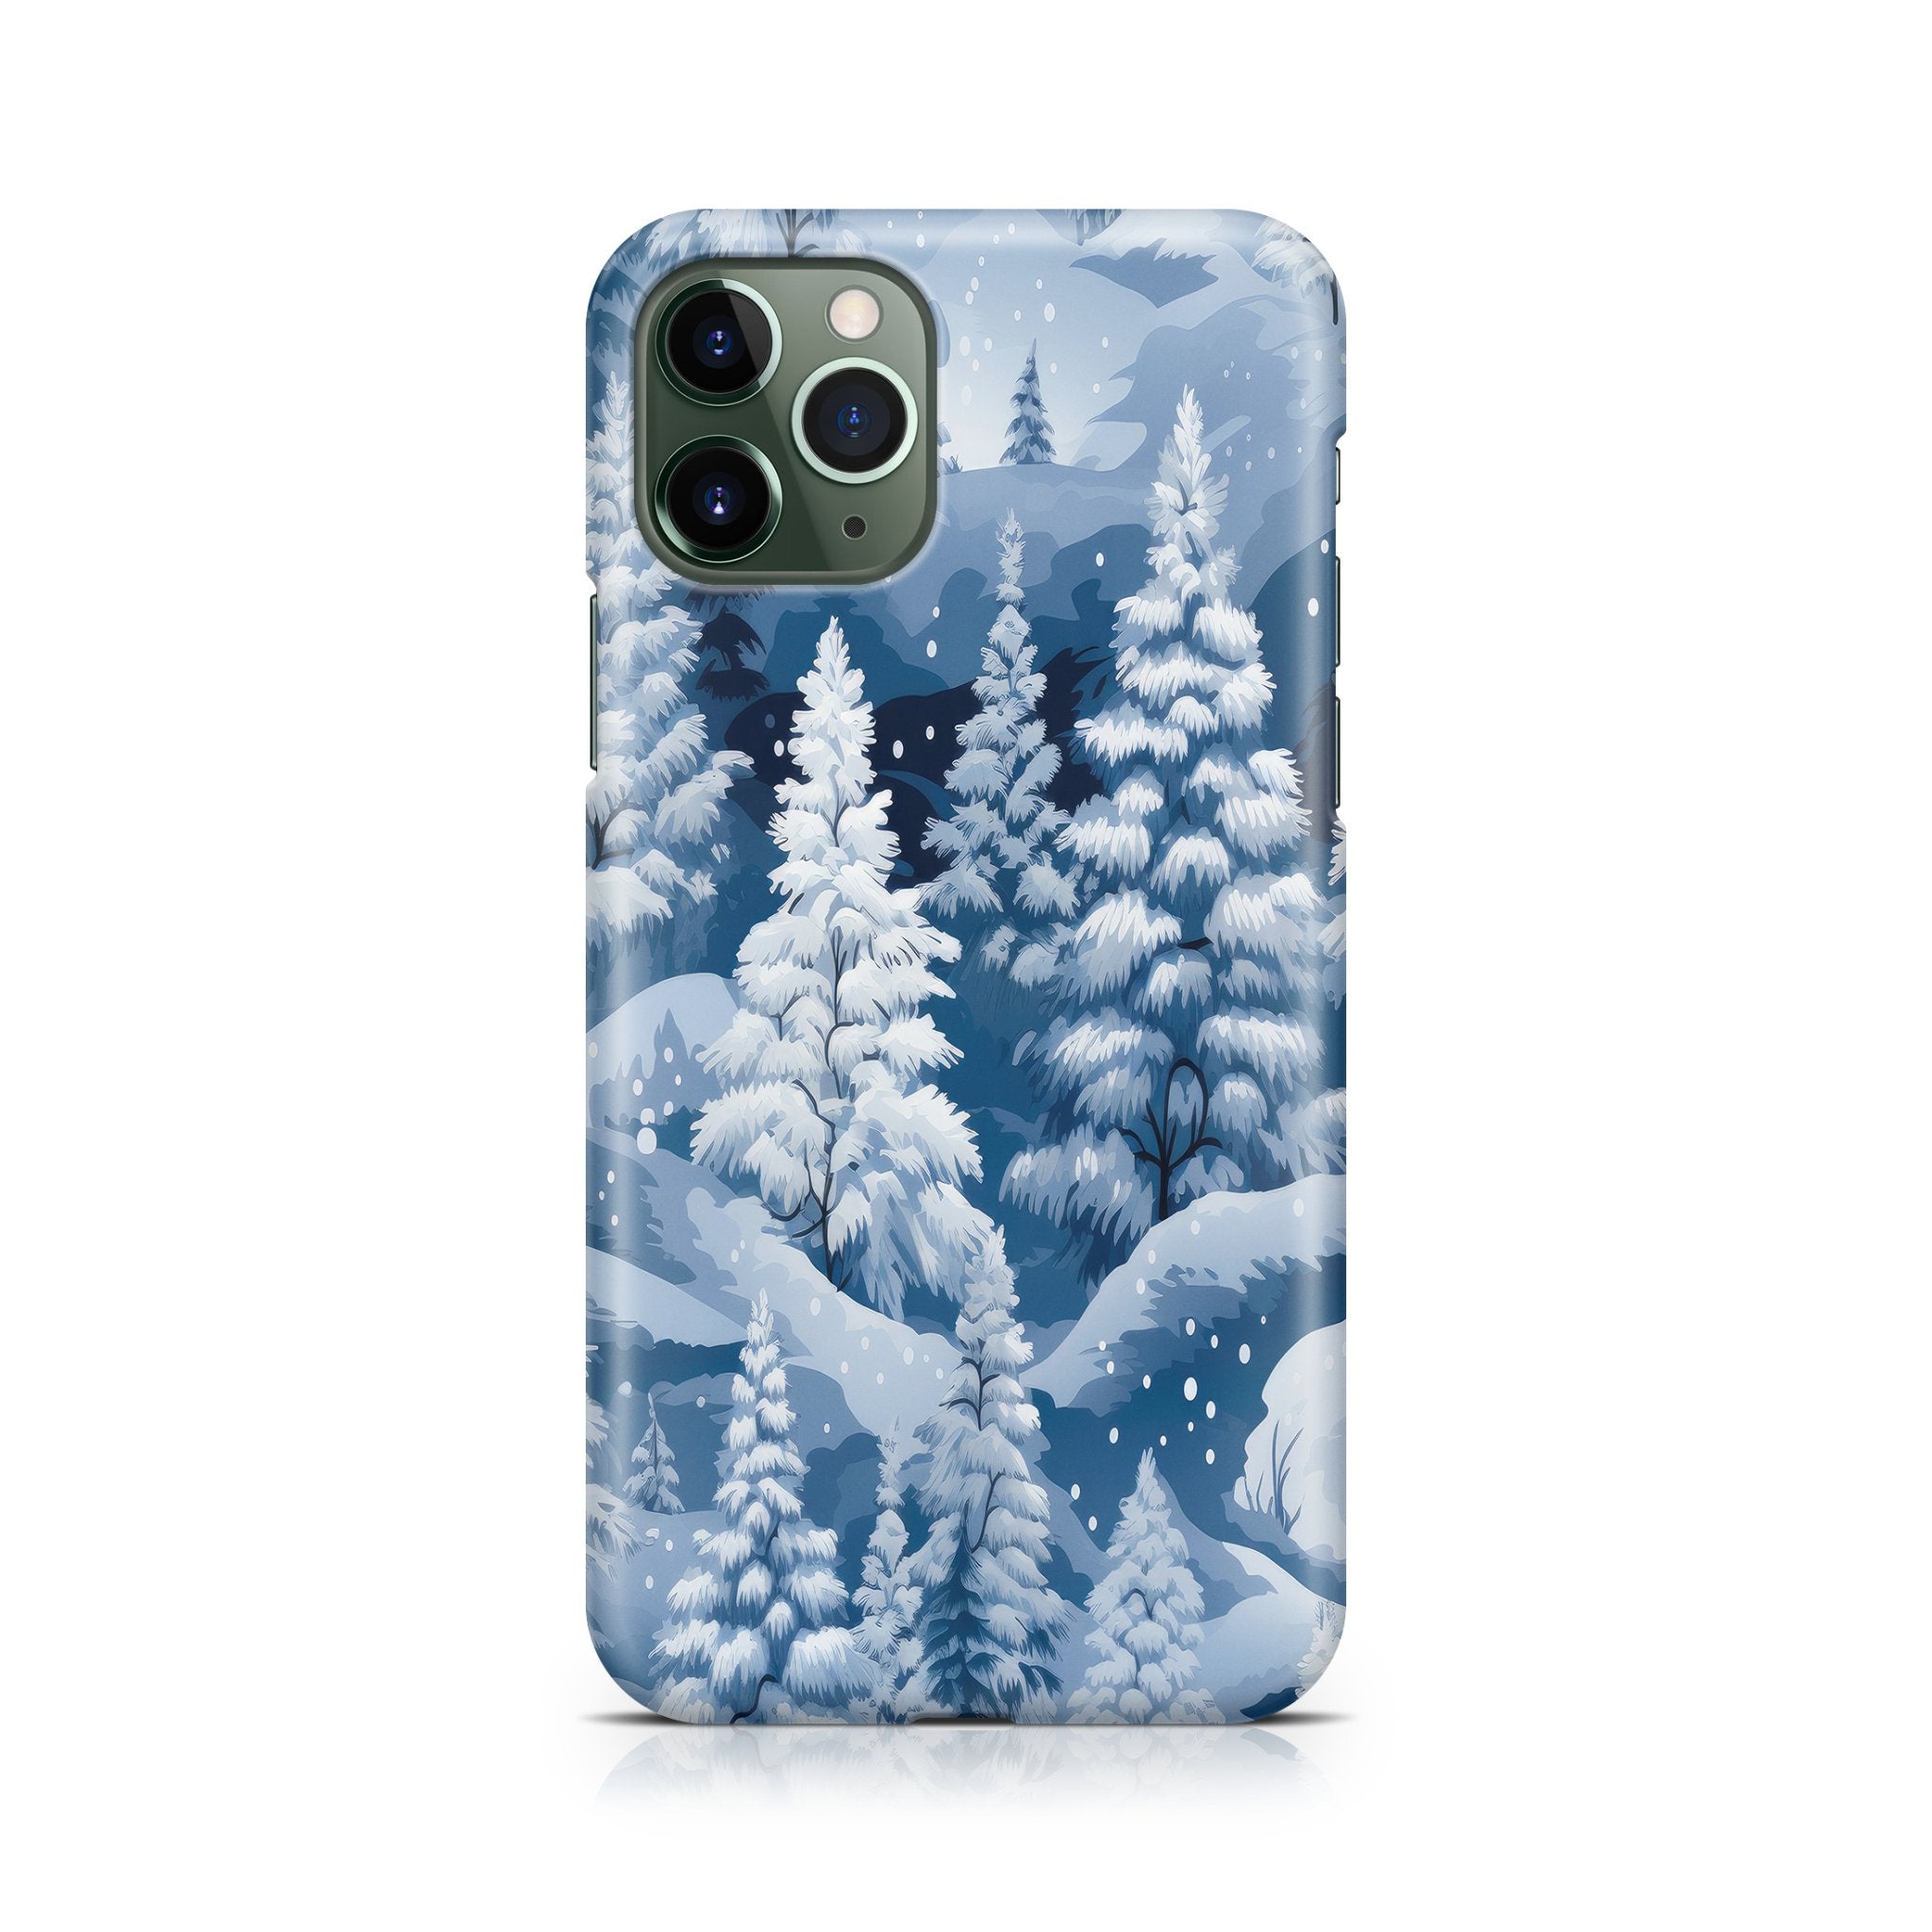 Snowy Symphony - iPhone phone case designs by CaseSwagger